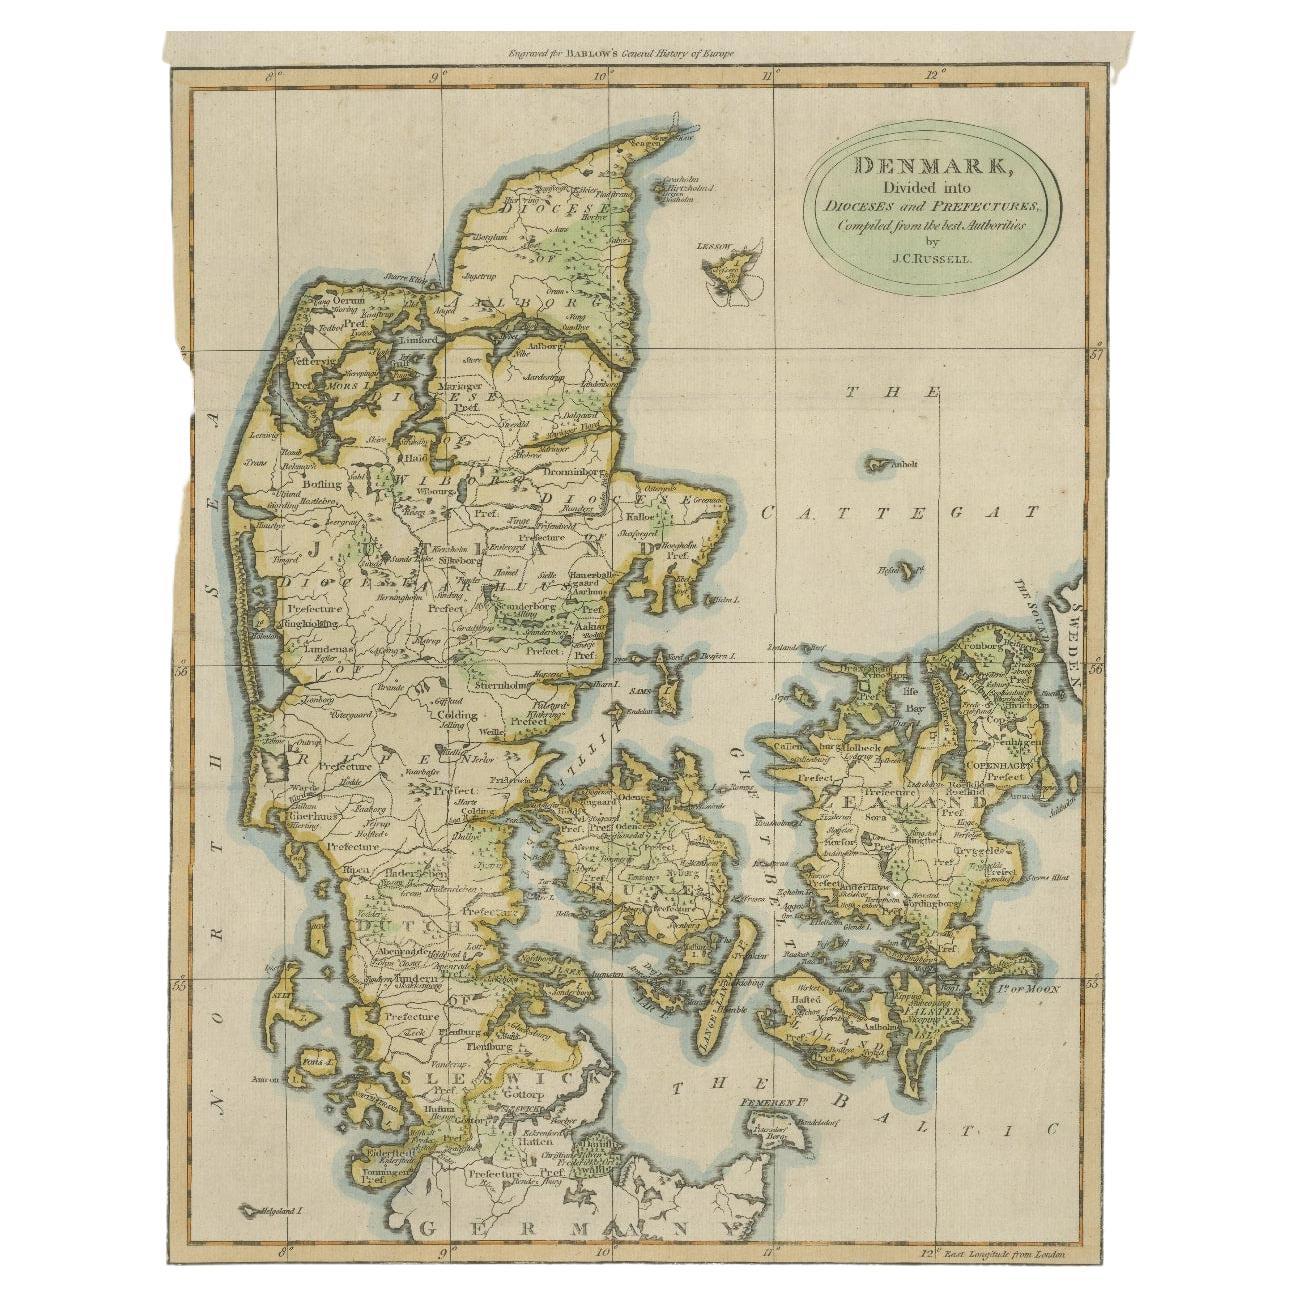 Published by Russell (J. C.). Denmark. Divided into Dioceses and Prefectures compiled from the best Authorities, 1790, hand-coloured engraved map on handmade paper with watermark. 410 x 320 mm

Very nice detailed map of Denmark in the 18th